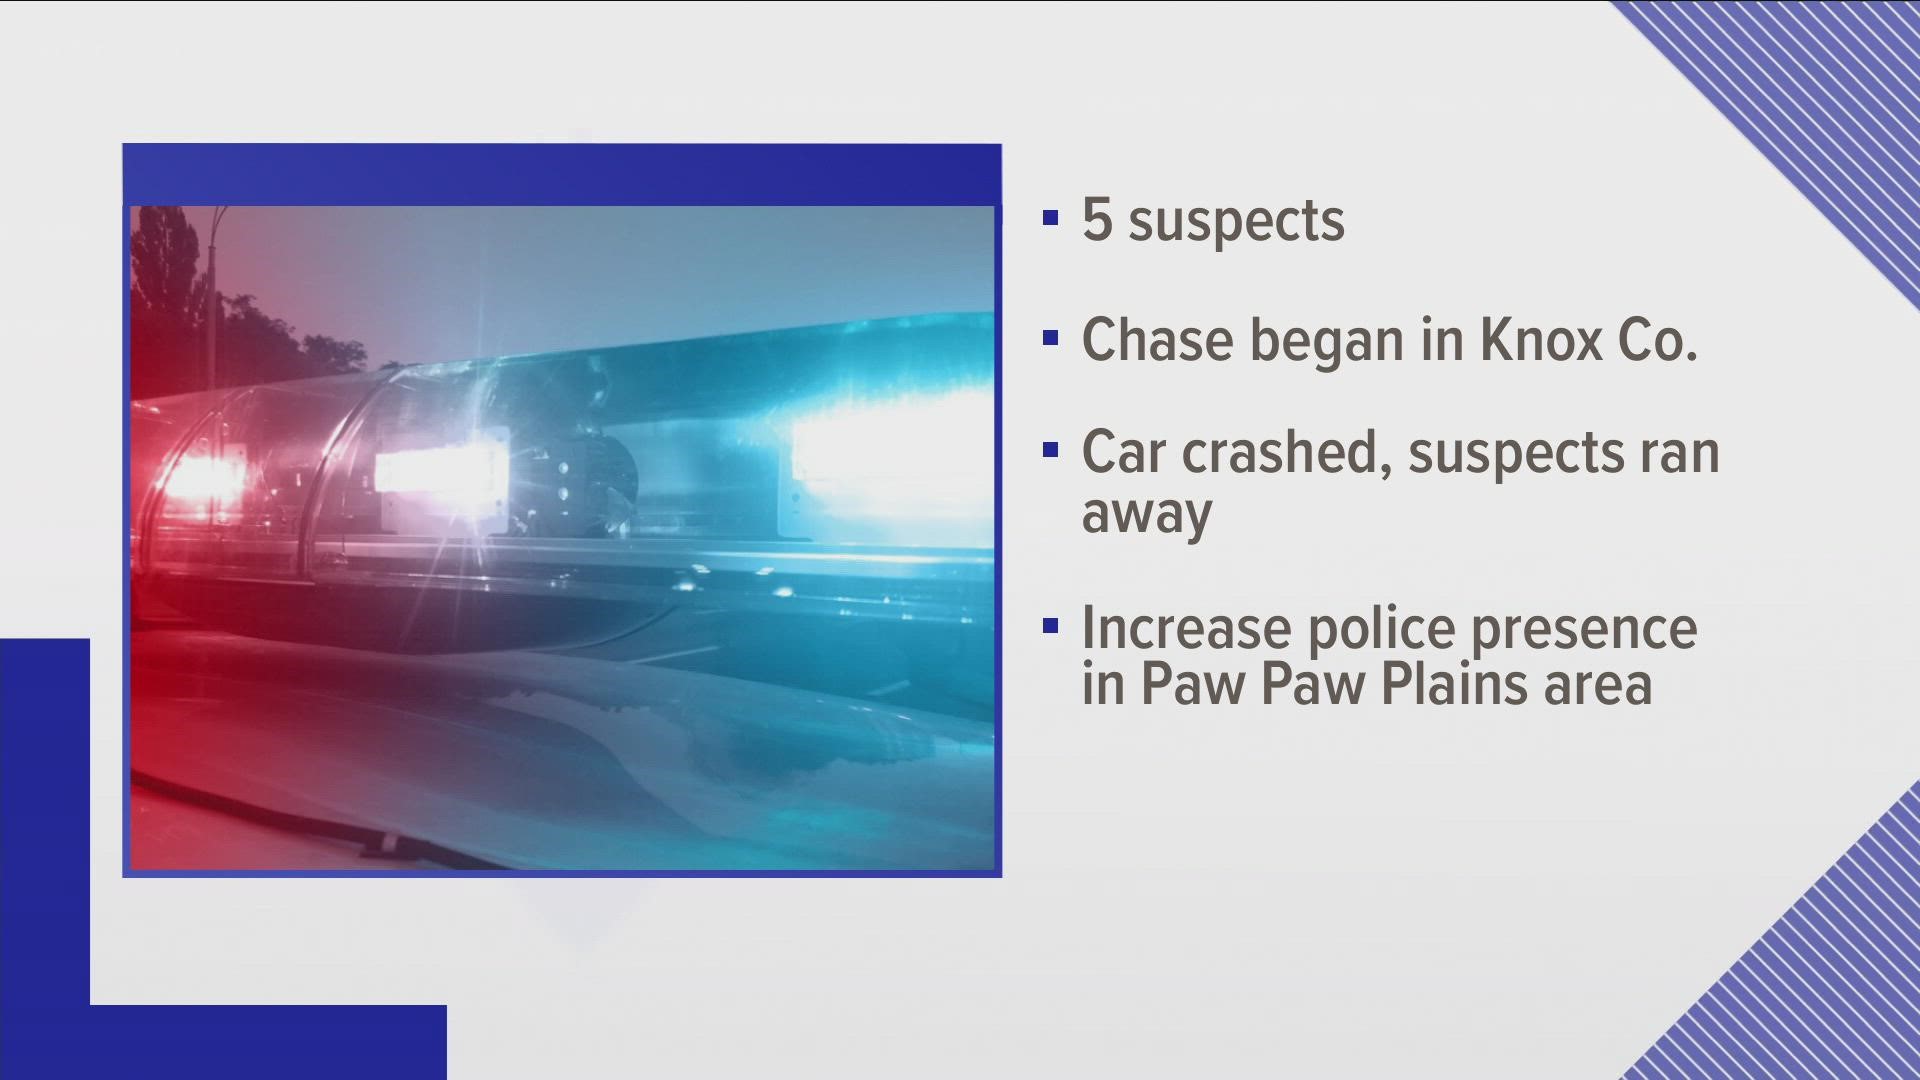 A spokesperson said there is a heavy law enforcement presence in the Paw Paw Plains area of Loudon and Roane counties.